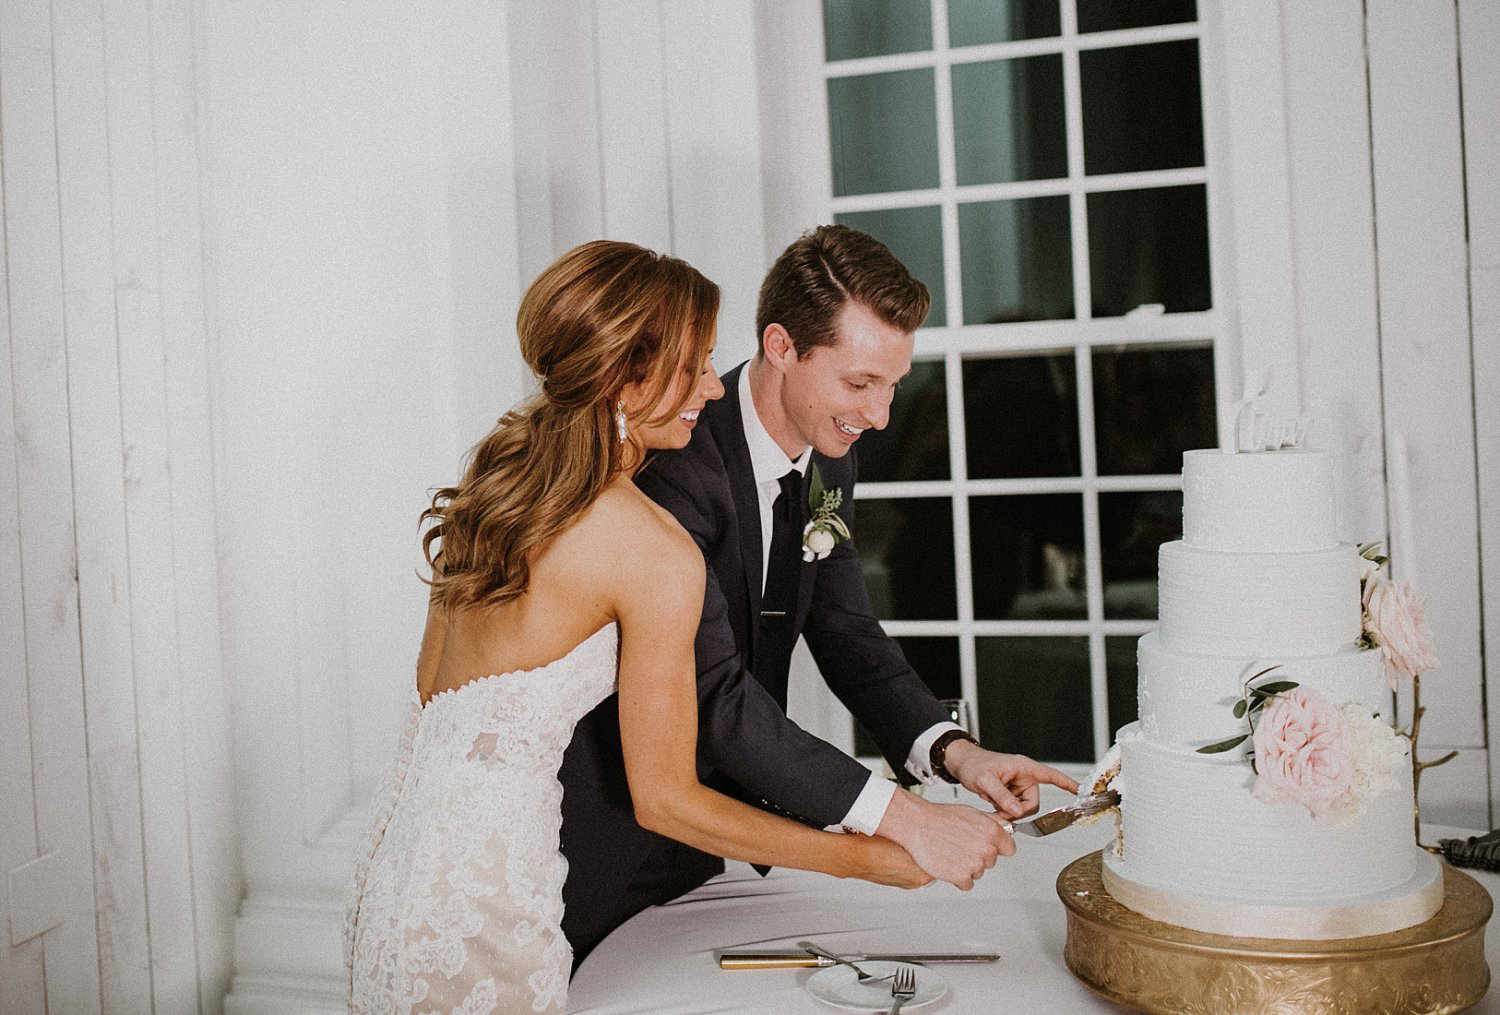 Bride and groom cutting wedding cake in front of white and white shiplap wall